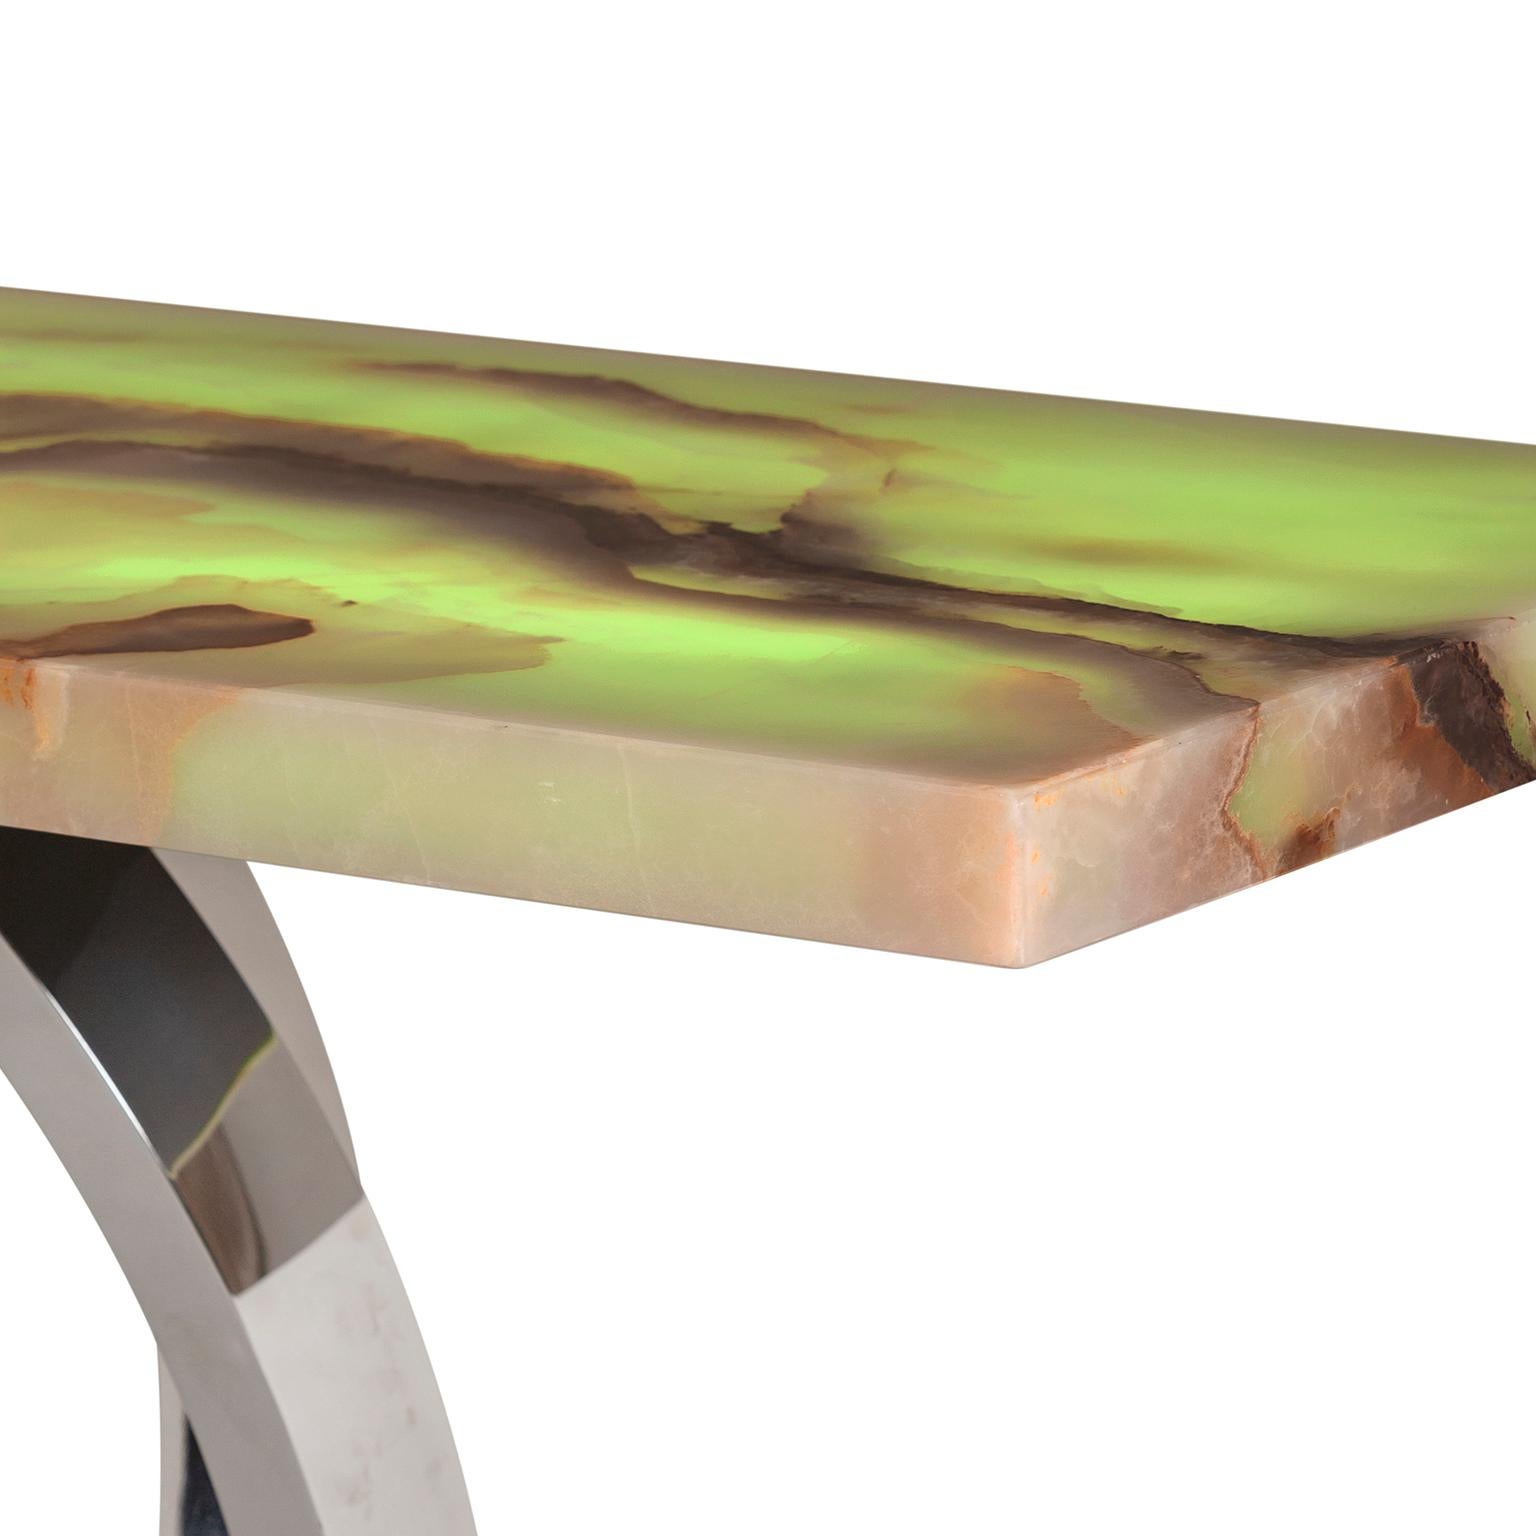 Contemporary Modern Armilar Console Table Onyx Stainless Steel Handmade Portugal Greenapple For Sale